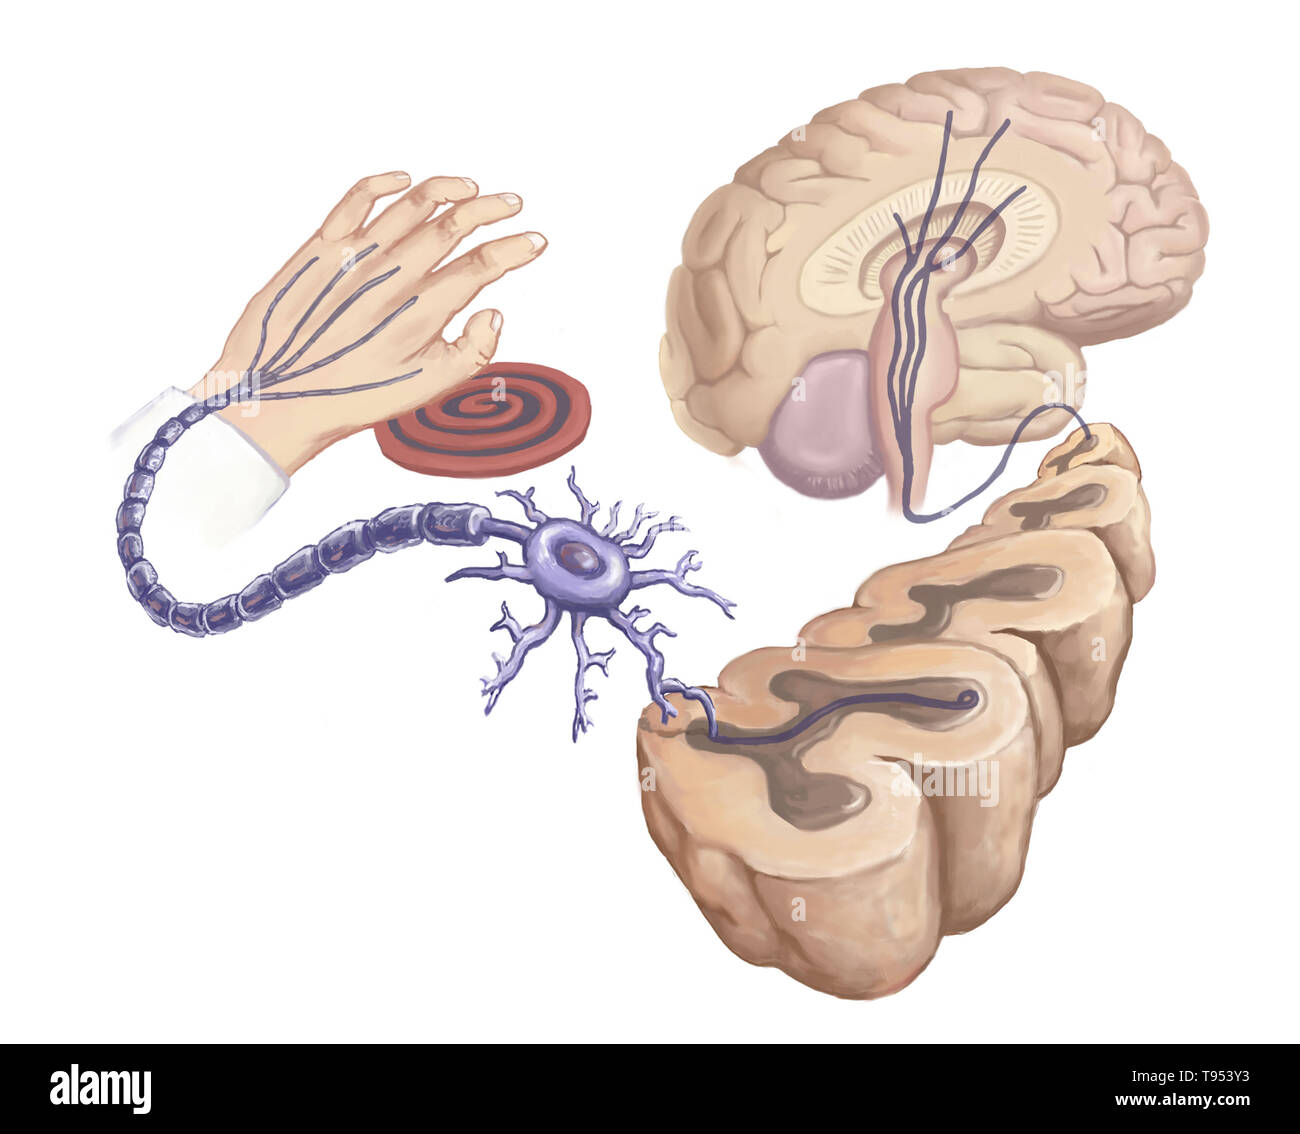 Illustration of a hand touching a hot stove element and reaction in the body's neural circuits. Stock Photo